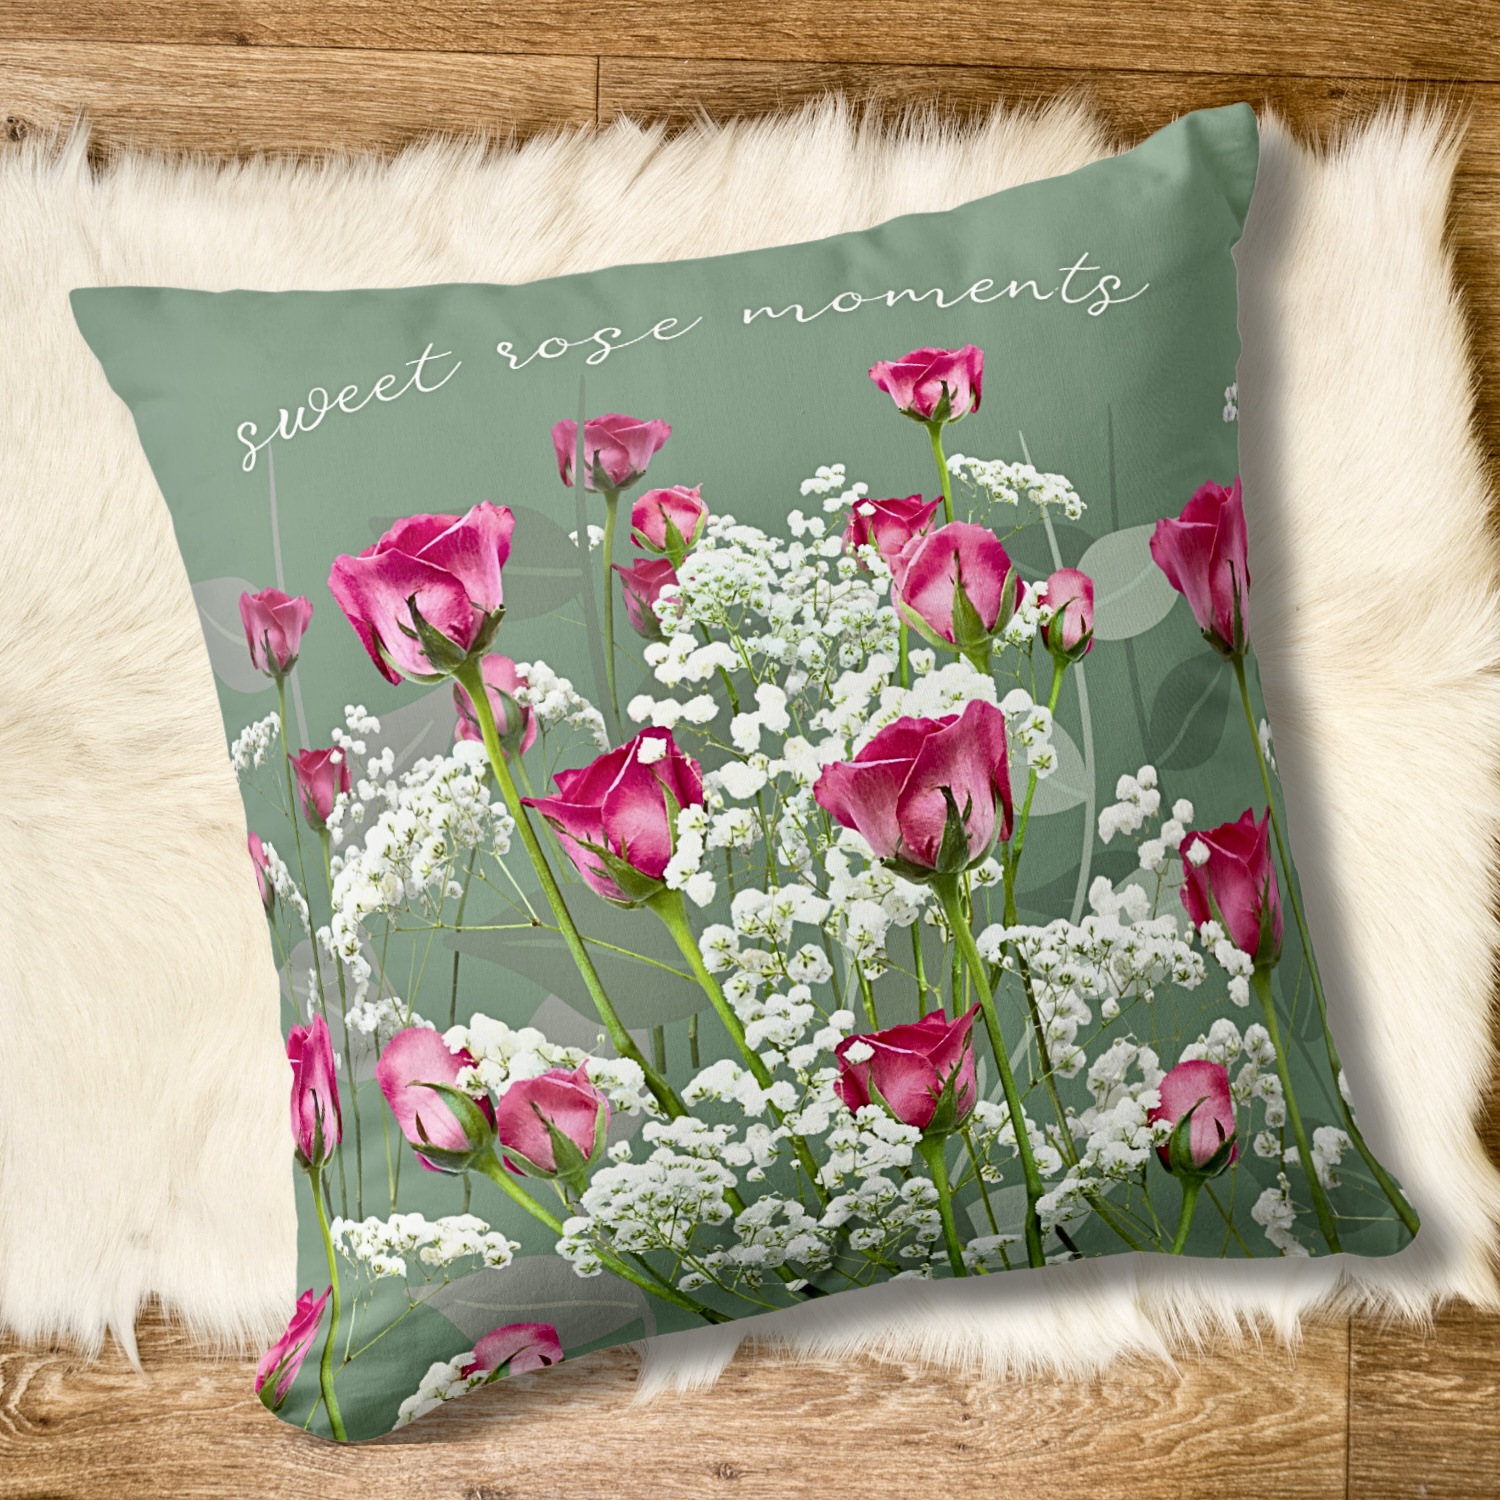 Green throw pillow on a soft rug with pink roses and white flowers, and “sweet pink moments” inspirational quote.